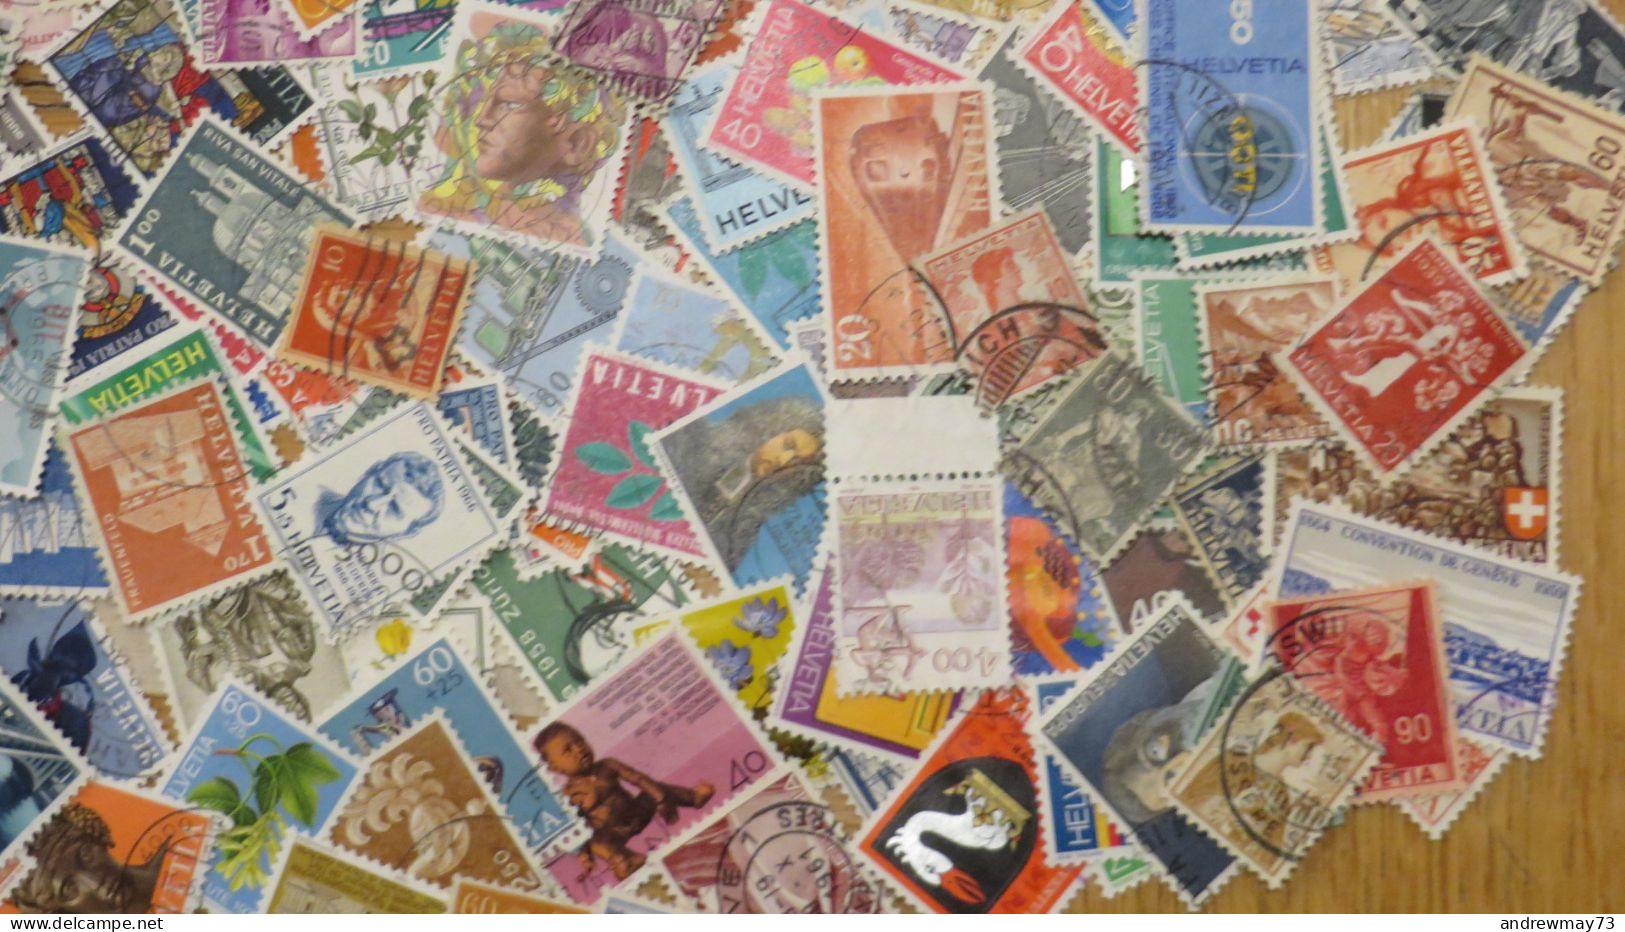 SWITZERLAND- NICE USED SELECTION- 724 DIFFERENT STAMPS- BARGAIN PRICE - Lotes/Colecciones